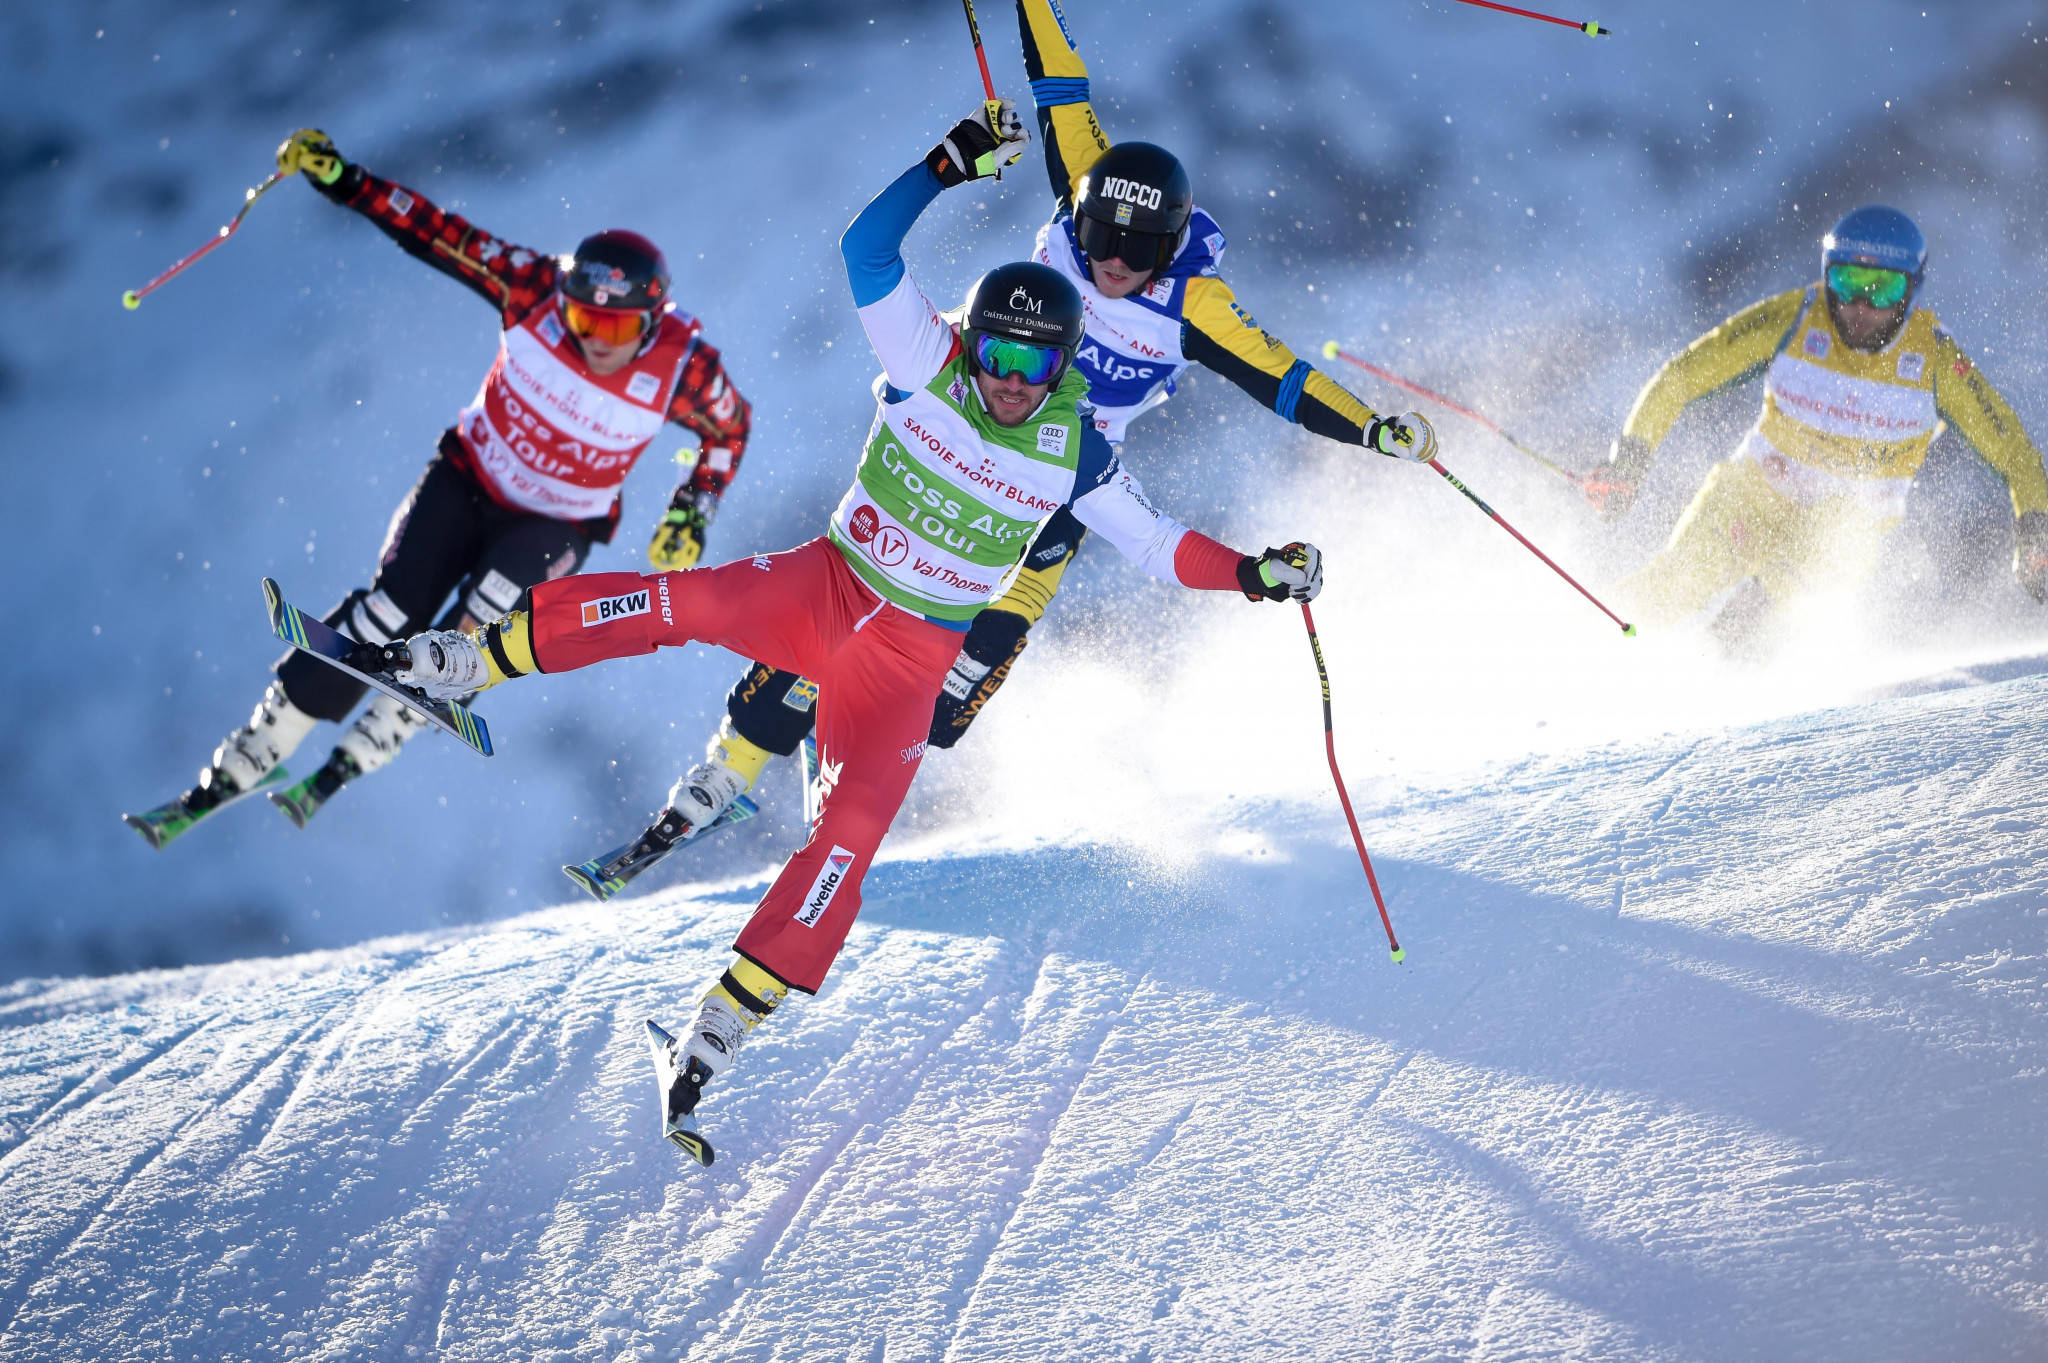 Midol brothers make podium again at FIS Ski Cross World Cup in Innichen 